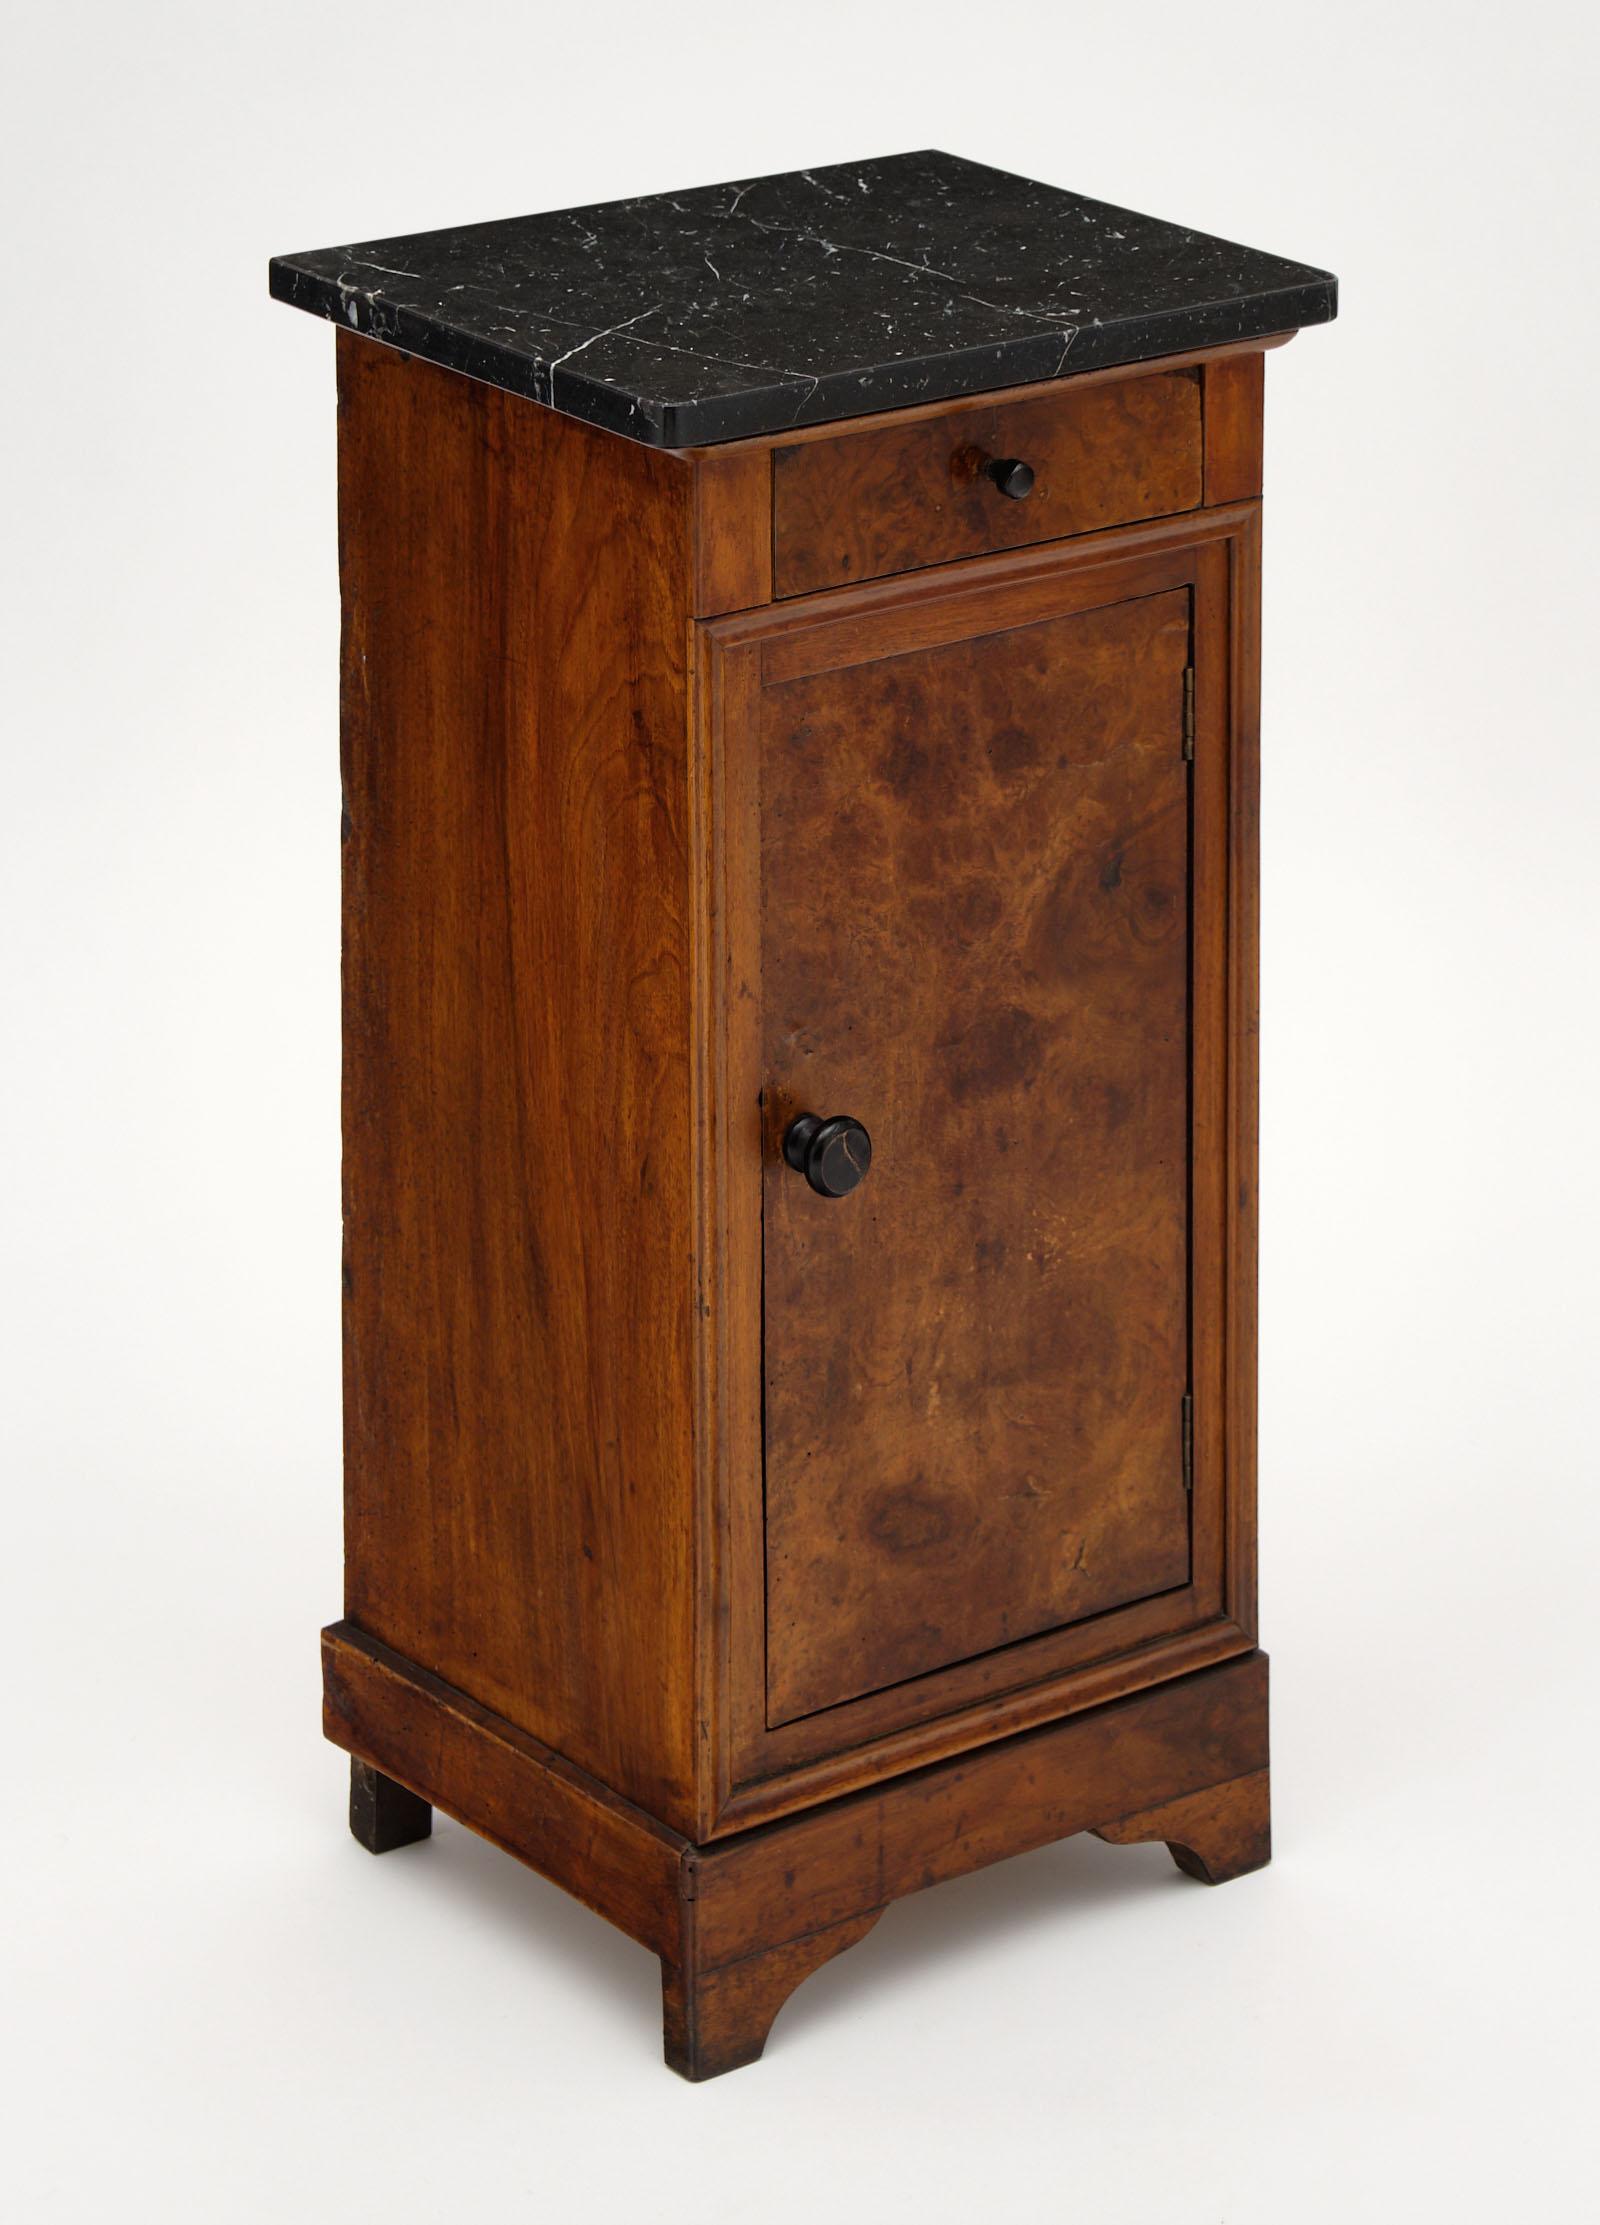 Louis Philippe period antique side table made of solid walnut and featuring a beautiful dark gray marble top.